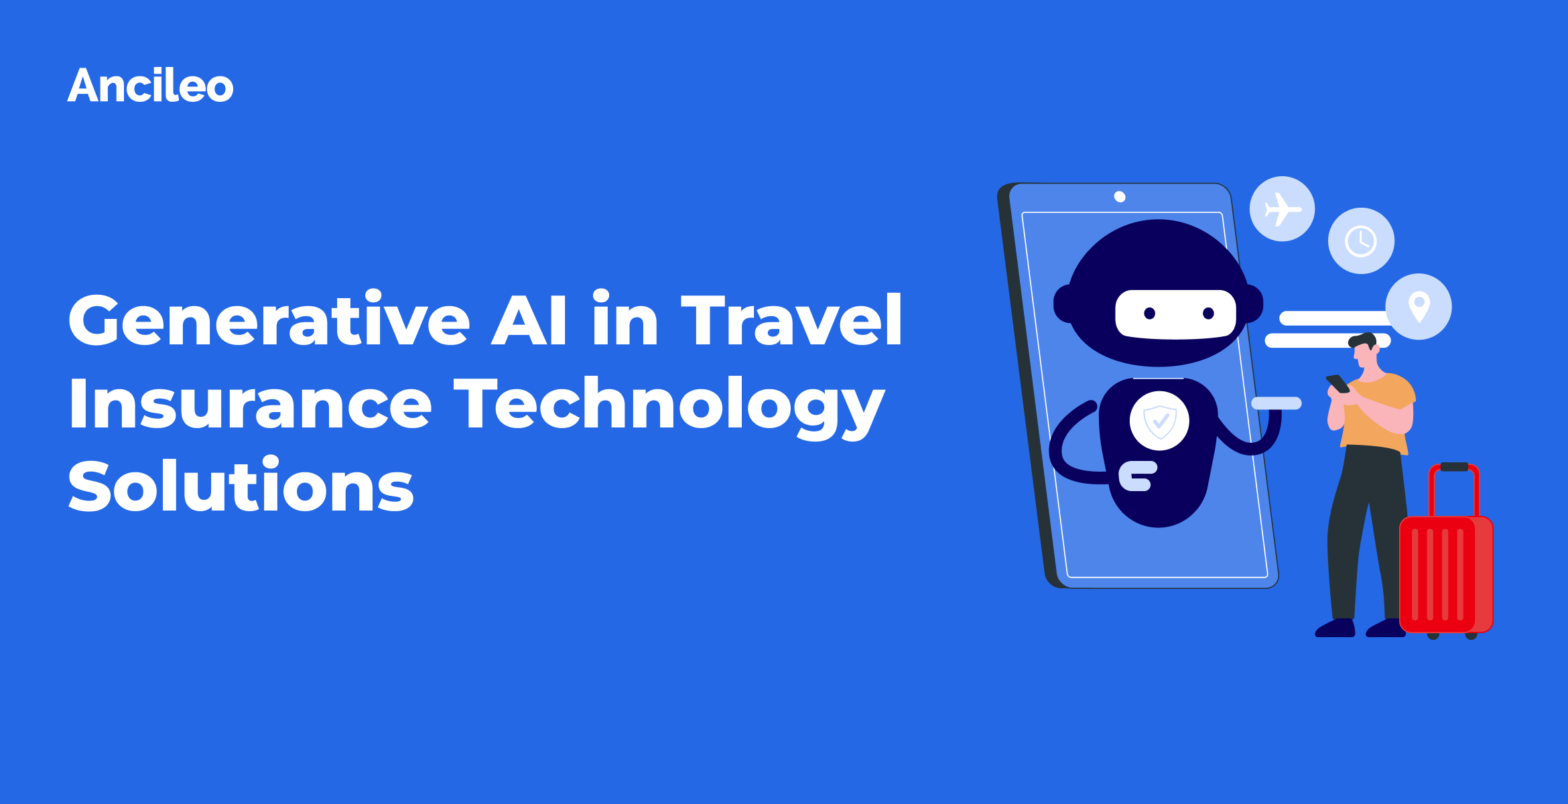 Generative AI in Travel Insurance Technology Solutions